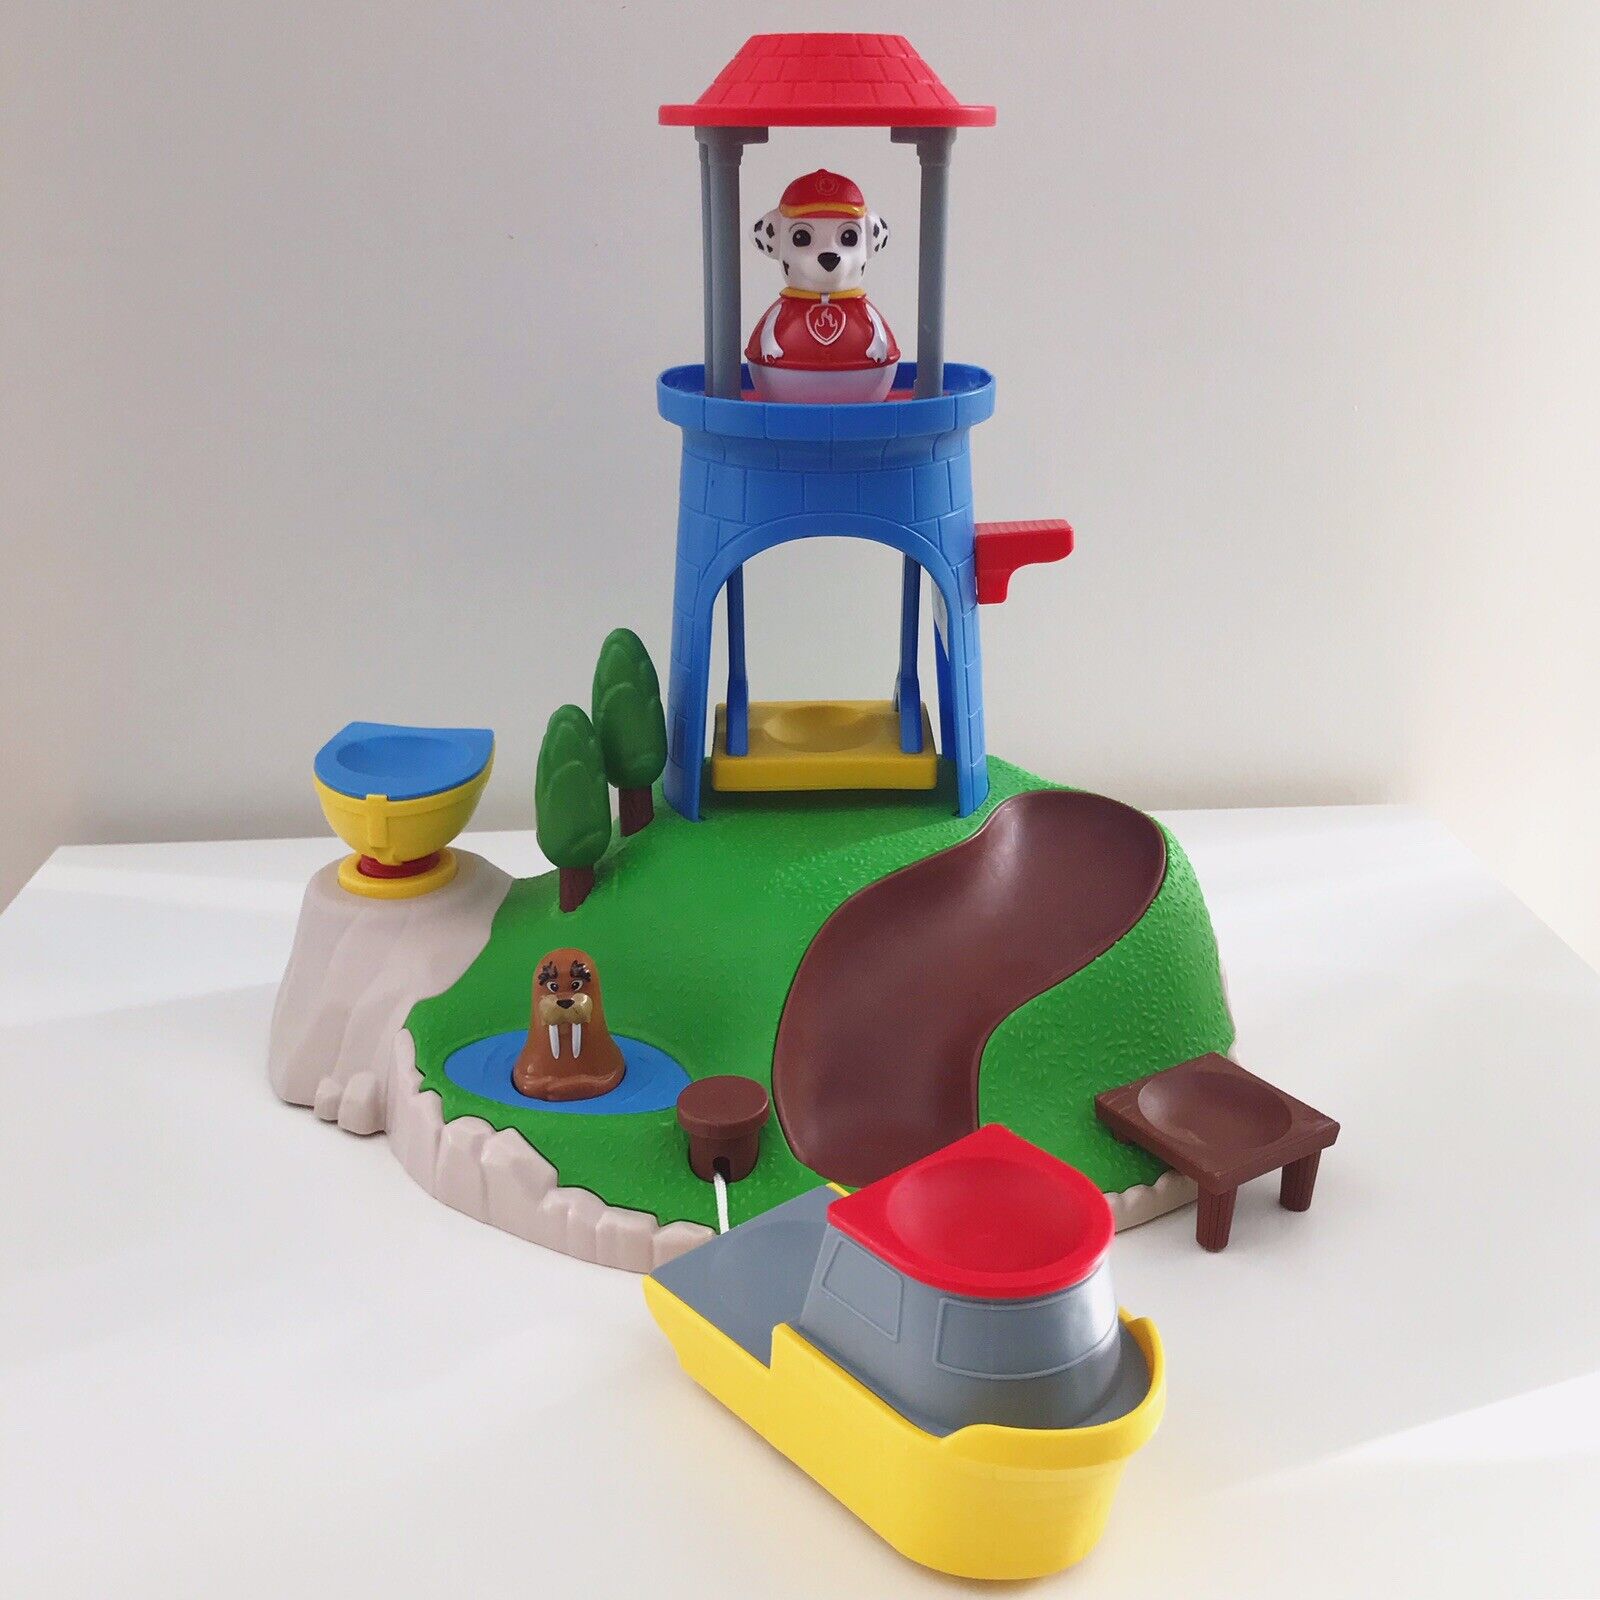 PAW PATROL WEEBLES Seal Island Playset OFFicial San Francisco Mall